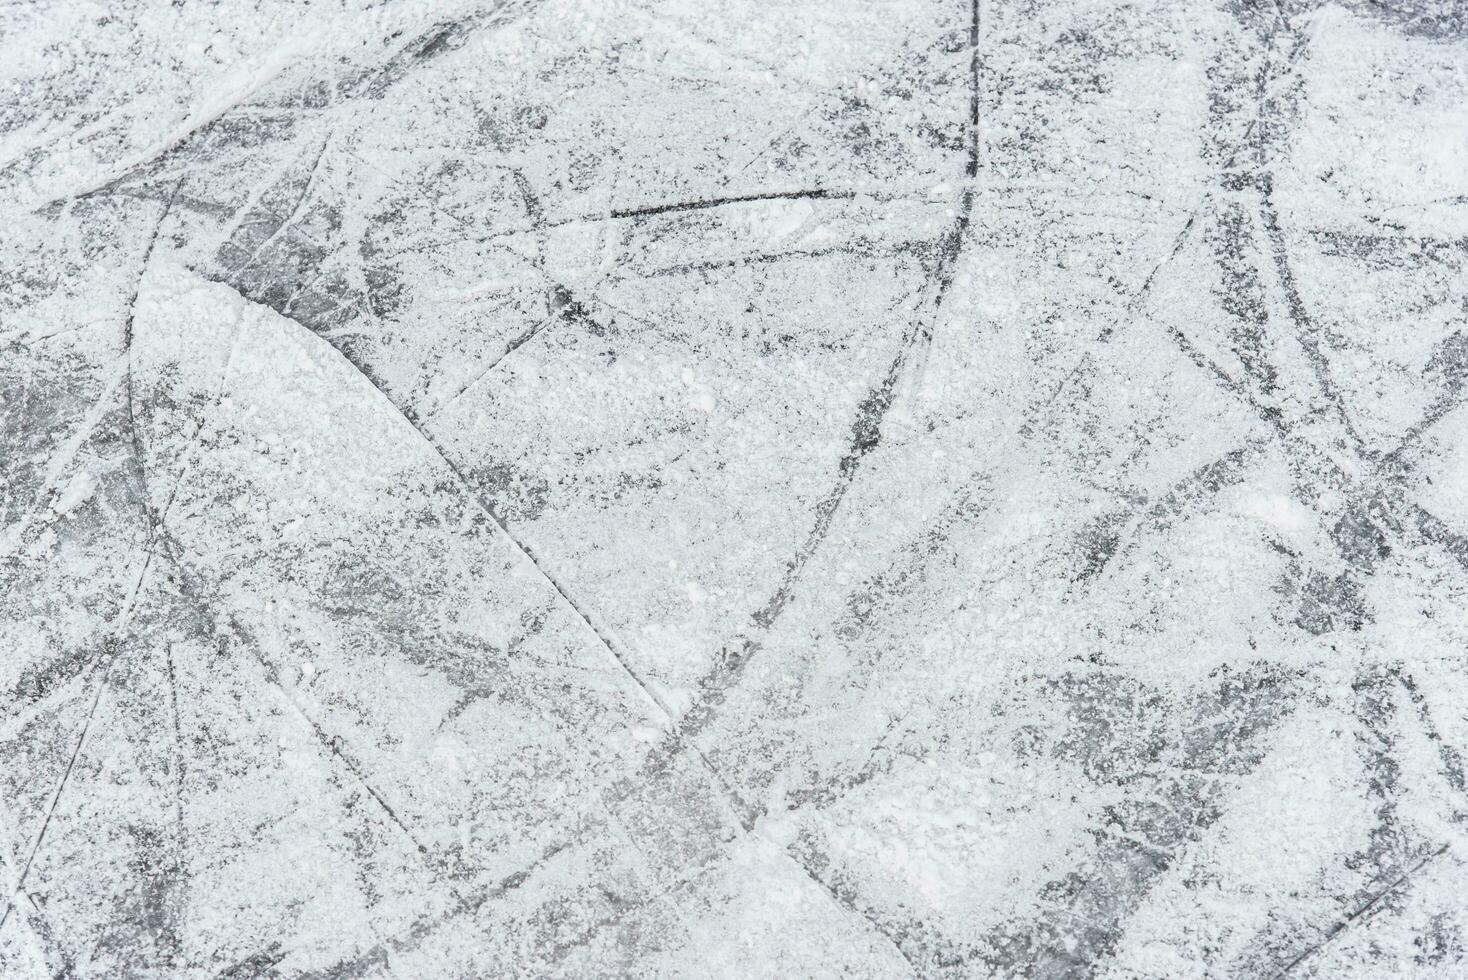 traces on the ice from skates on the rink photo